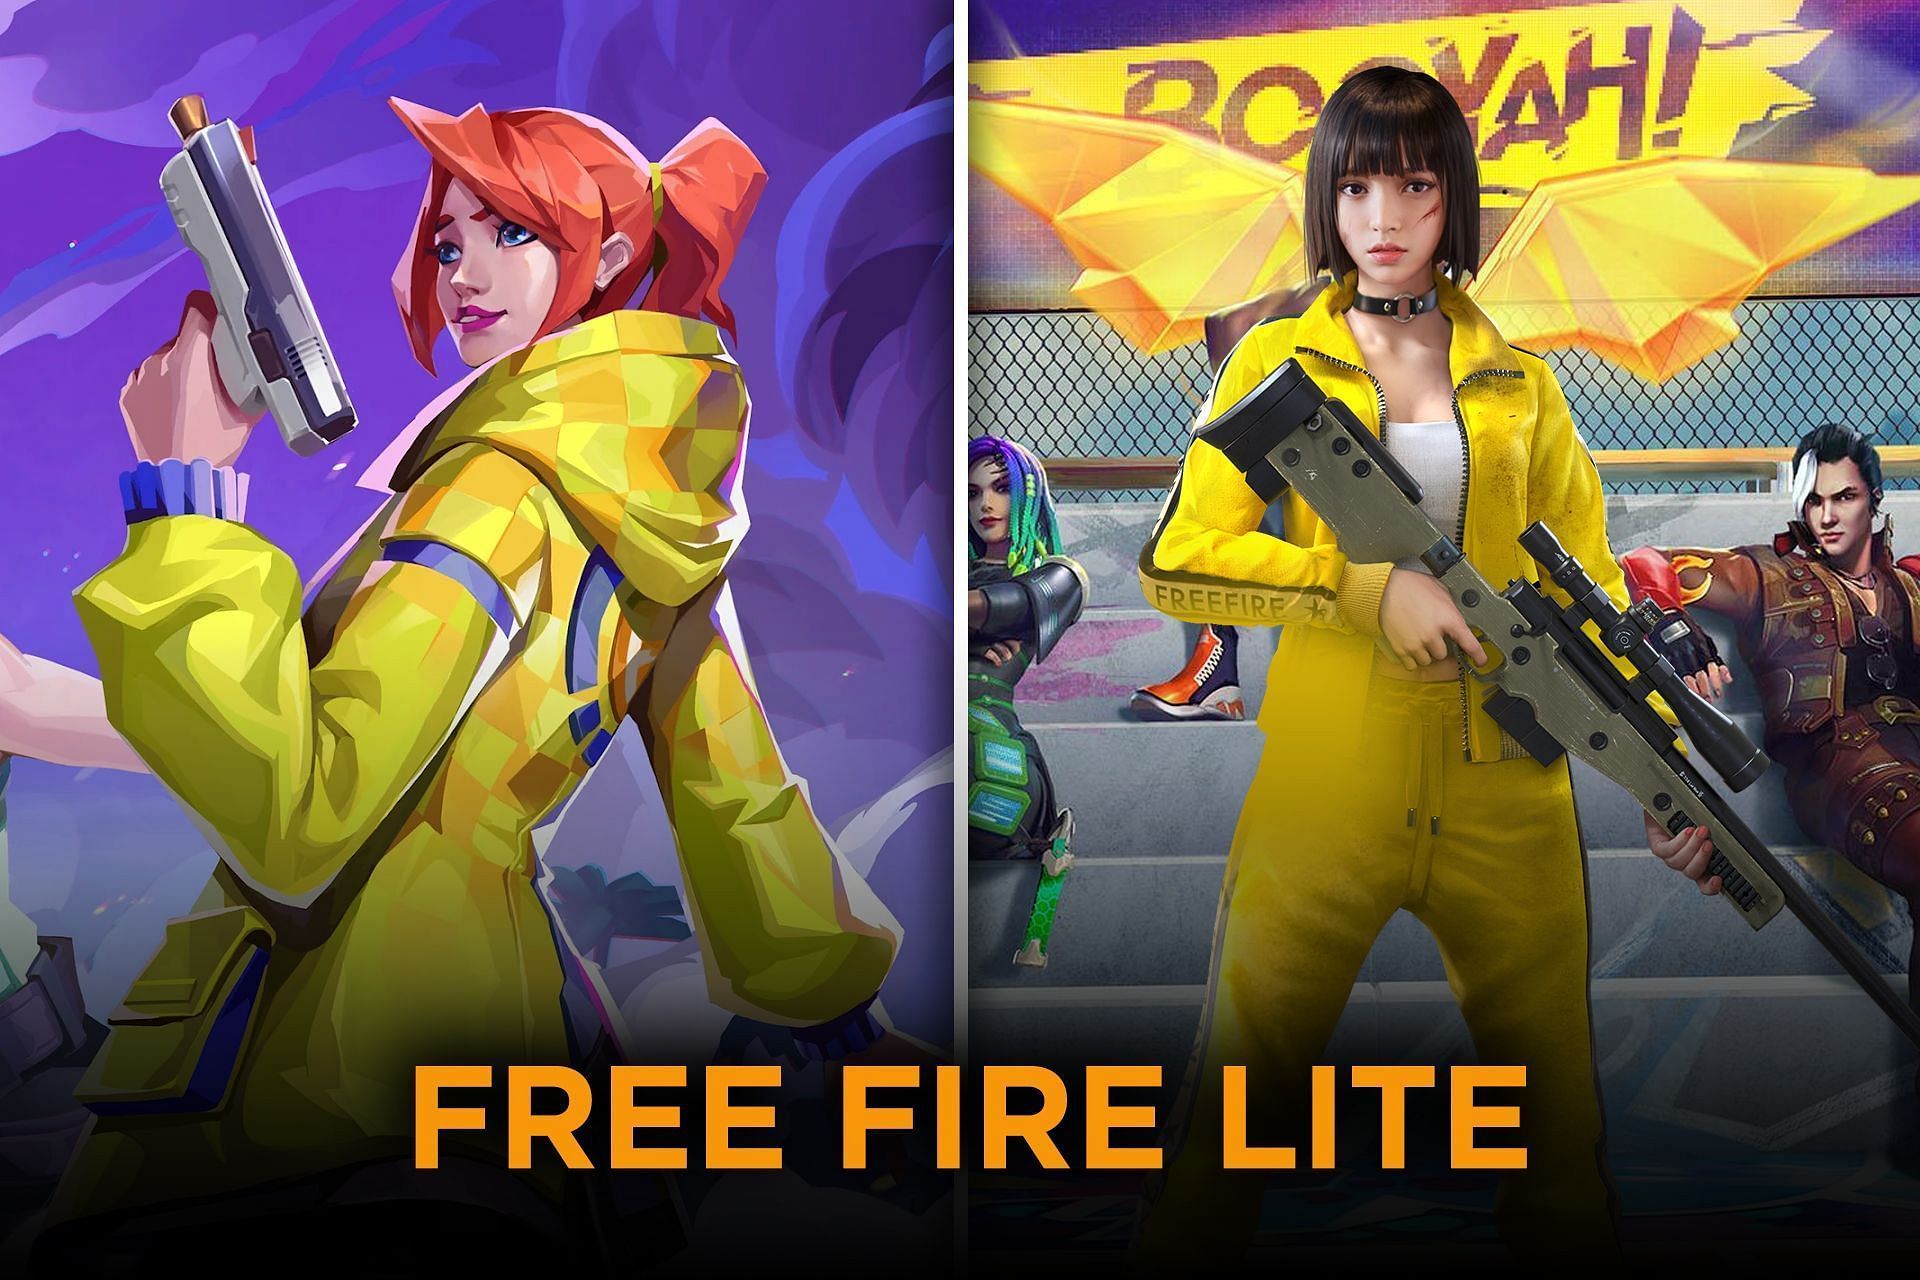 Fact Check: Is Free Fire Lite real?